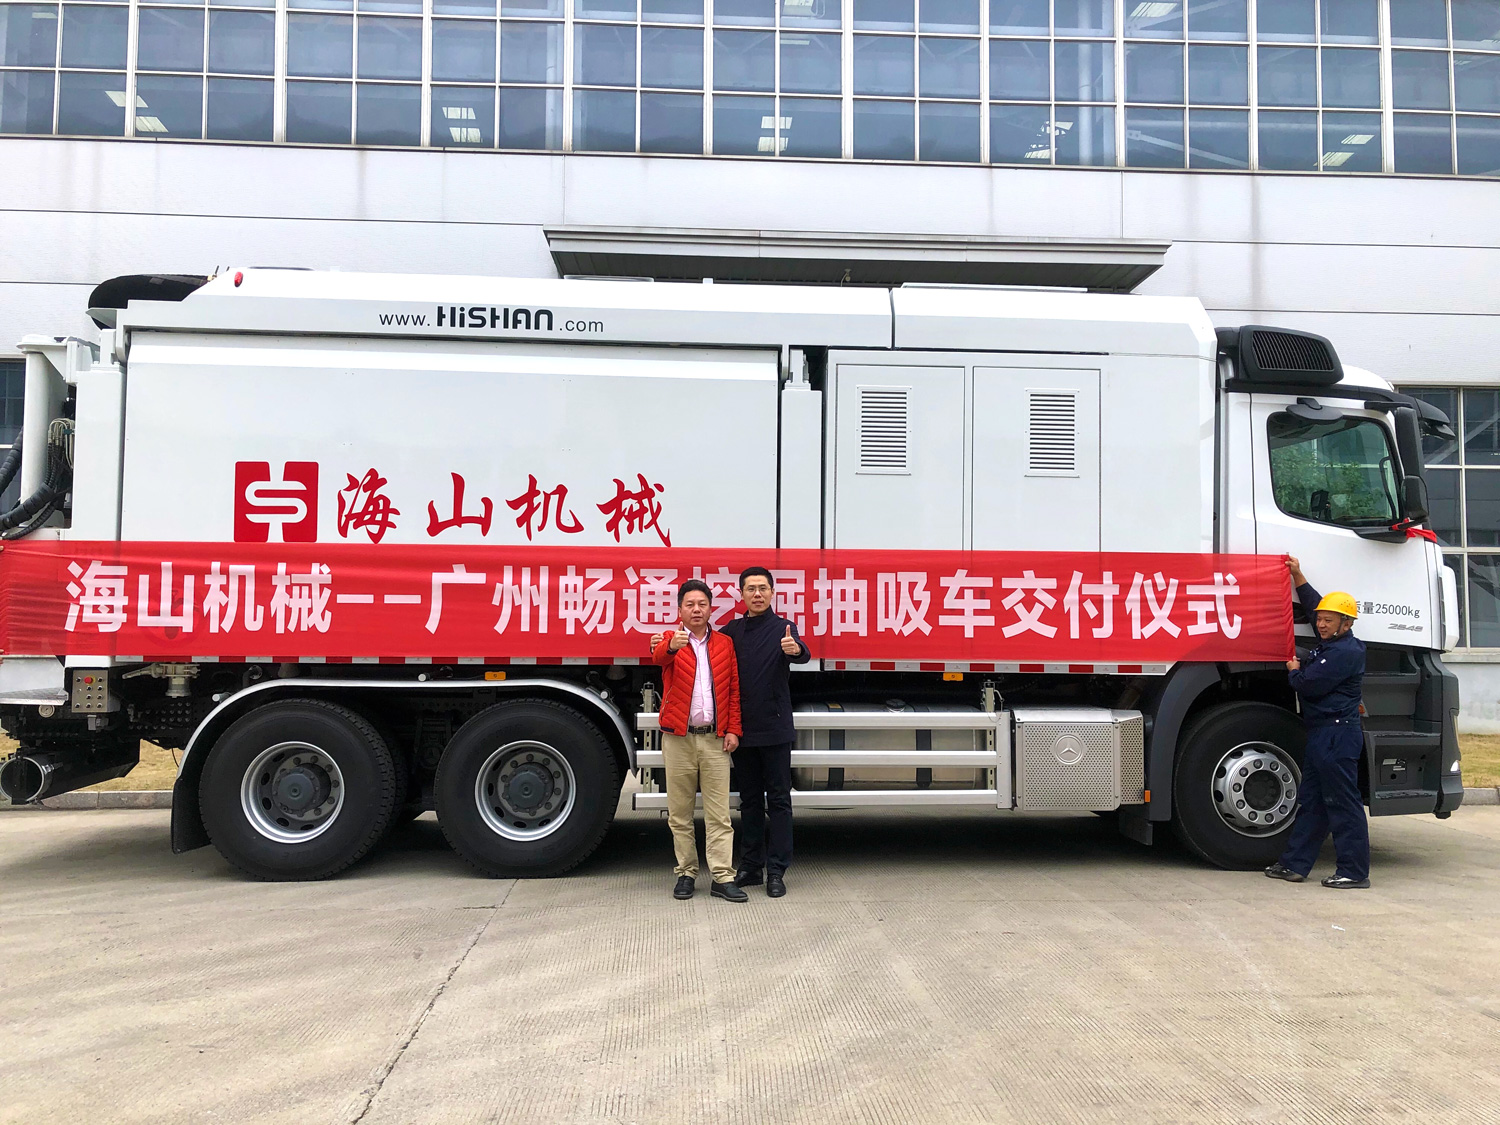 The excavation suction truck is settleed in Guangdong to escort the construction of the pipeline network